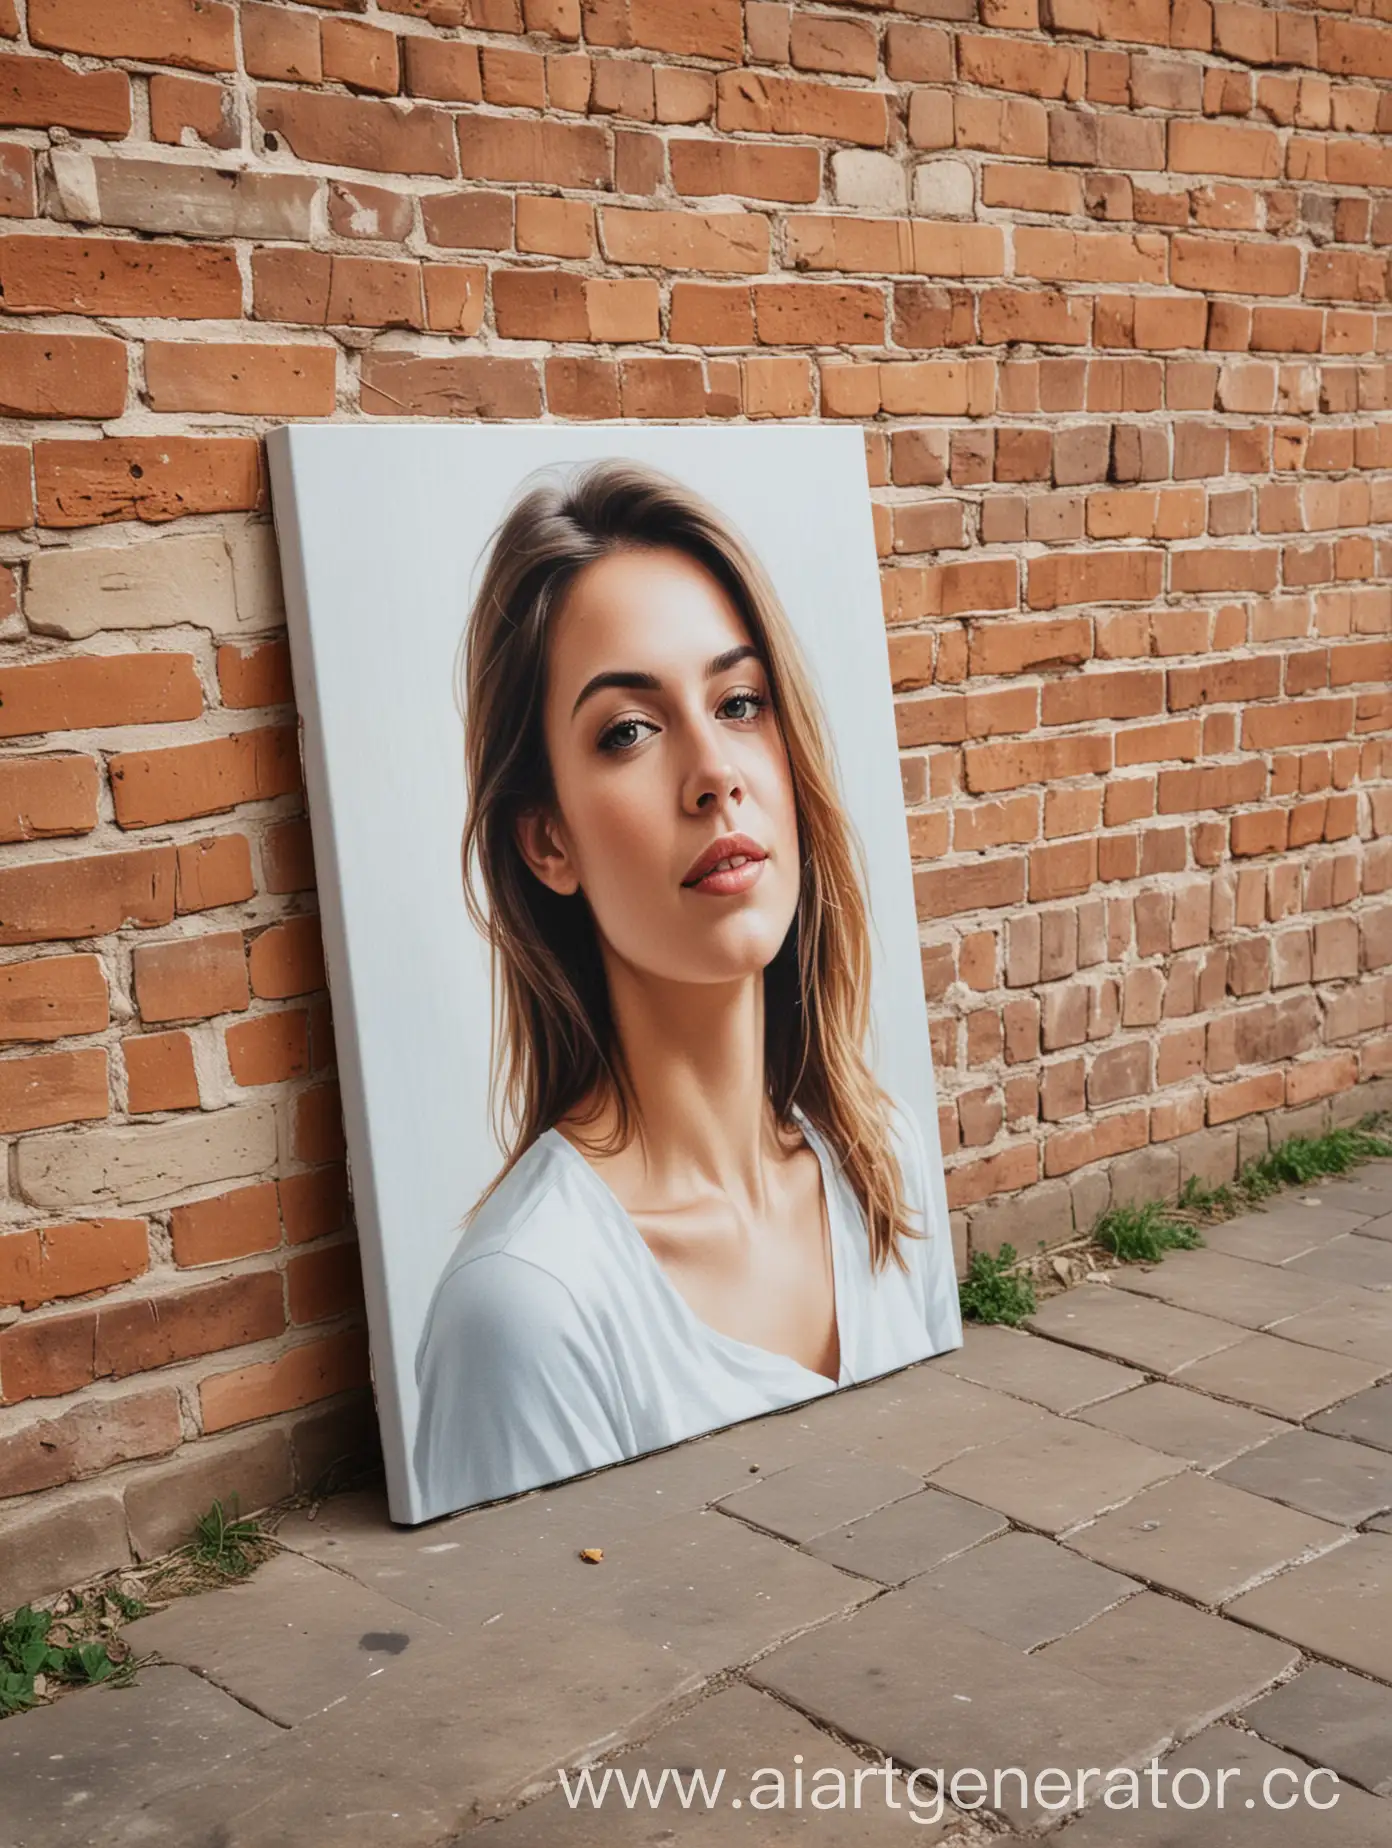 A portrait on canvas 50x70cm stands on the floor leaning against a brick wall in the park.